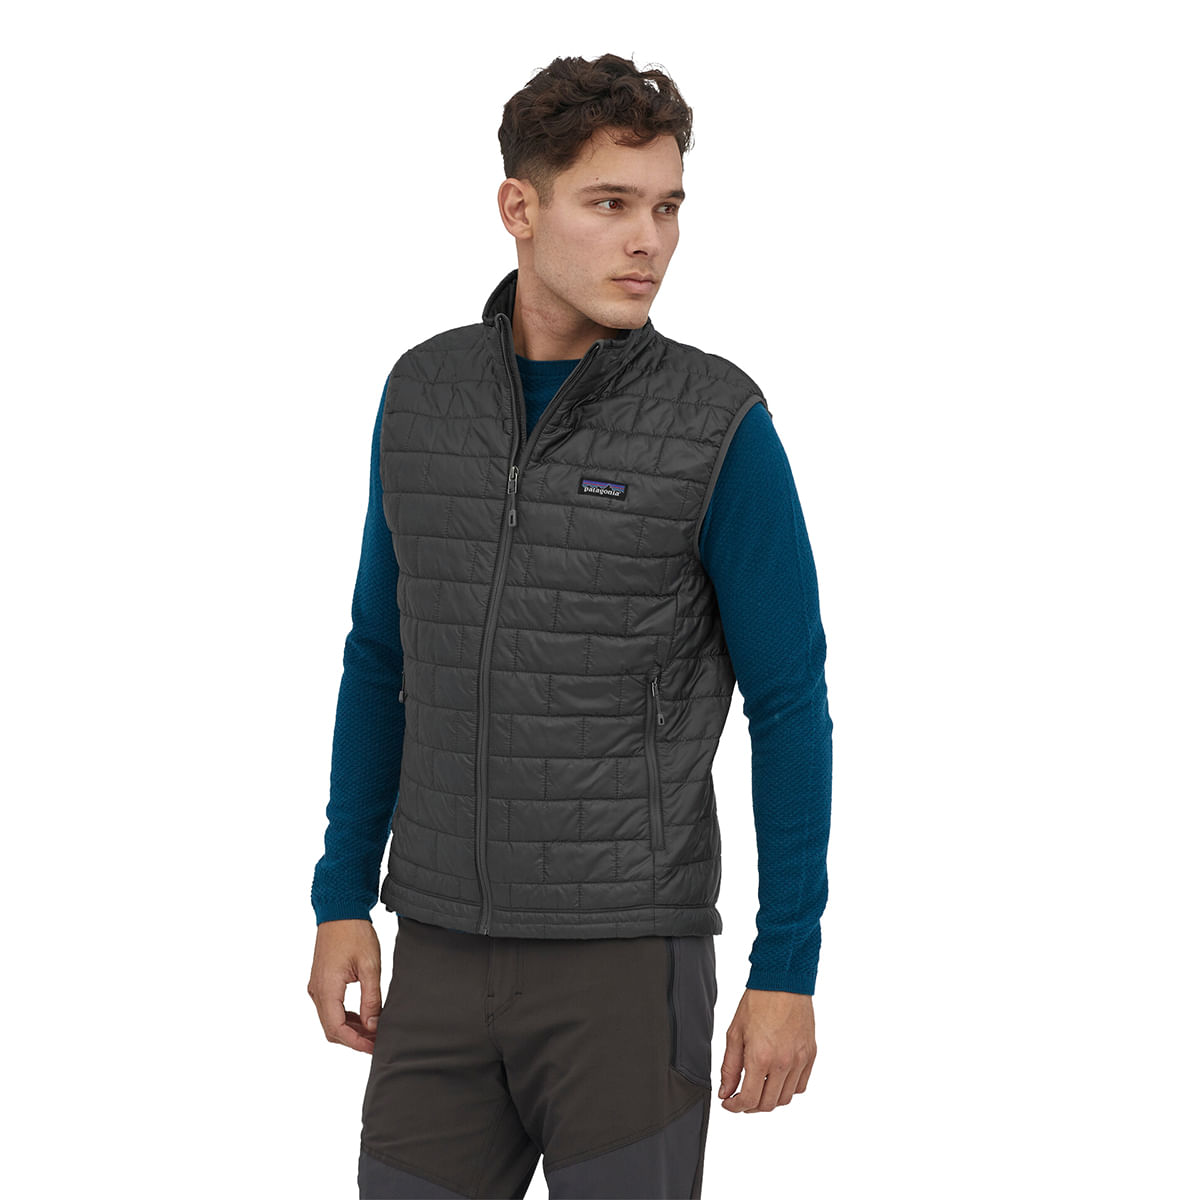 Patagonia Mens NANO PUFF VEST GREY - Paragon Sports: NYC's Best Specialty  Sports Store